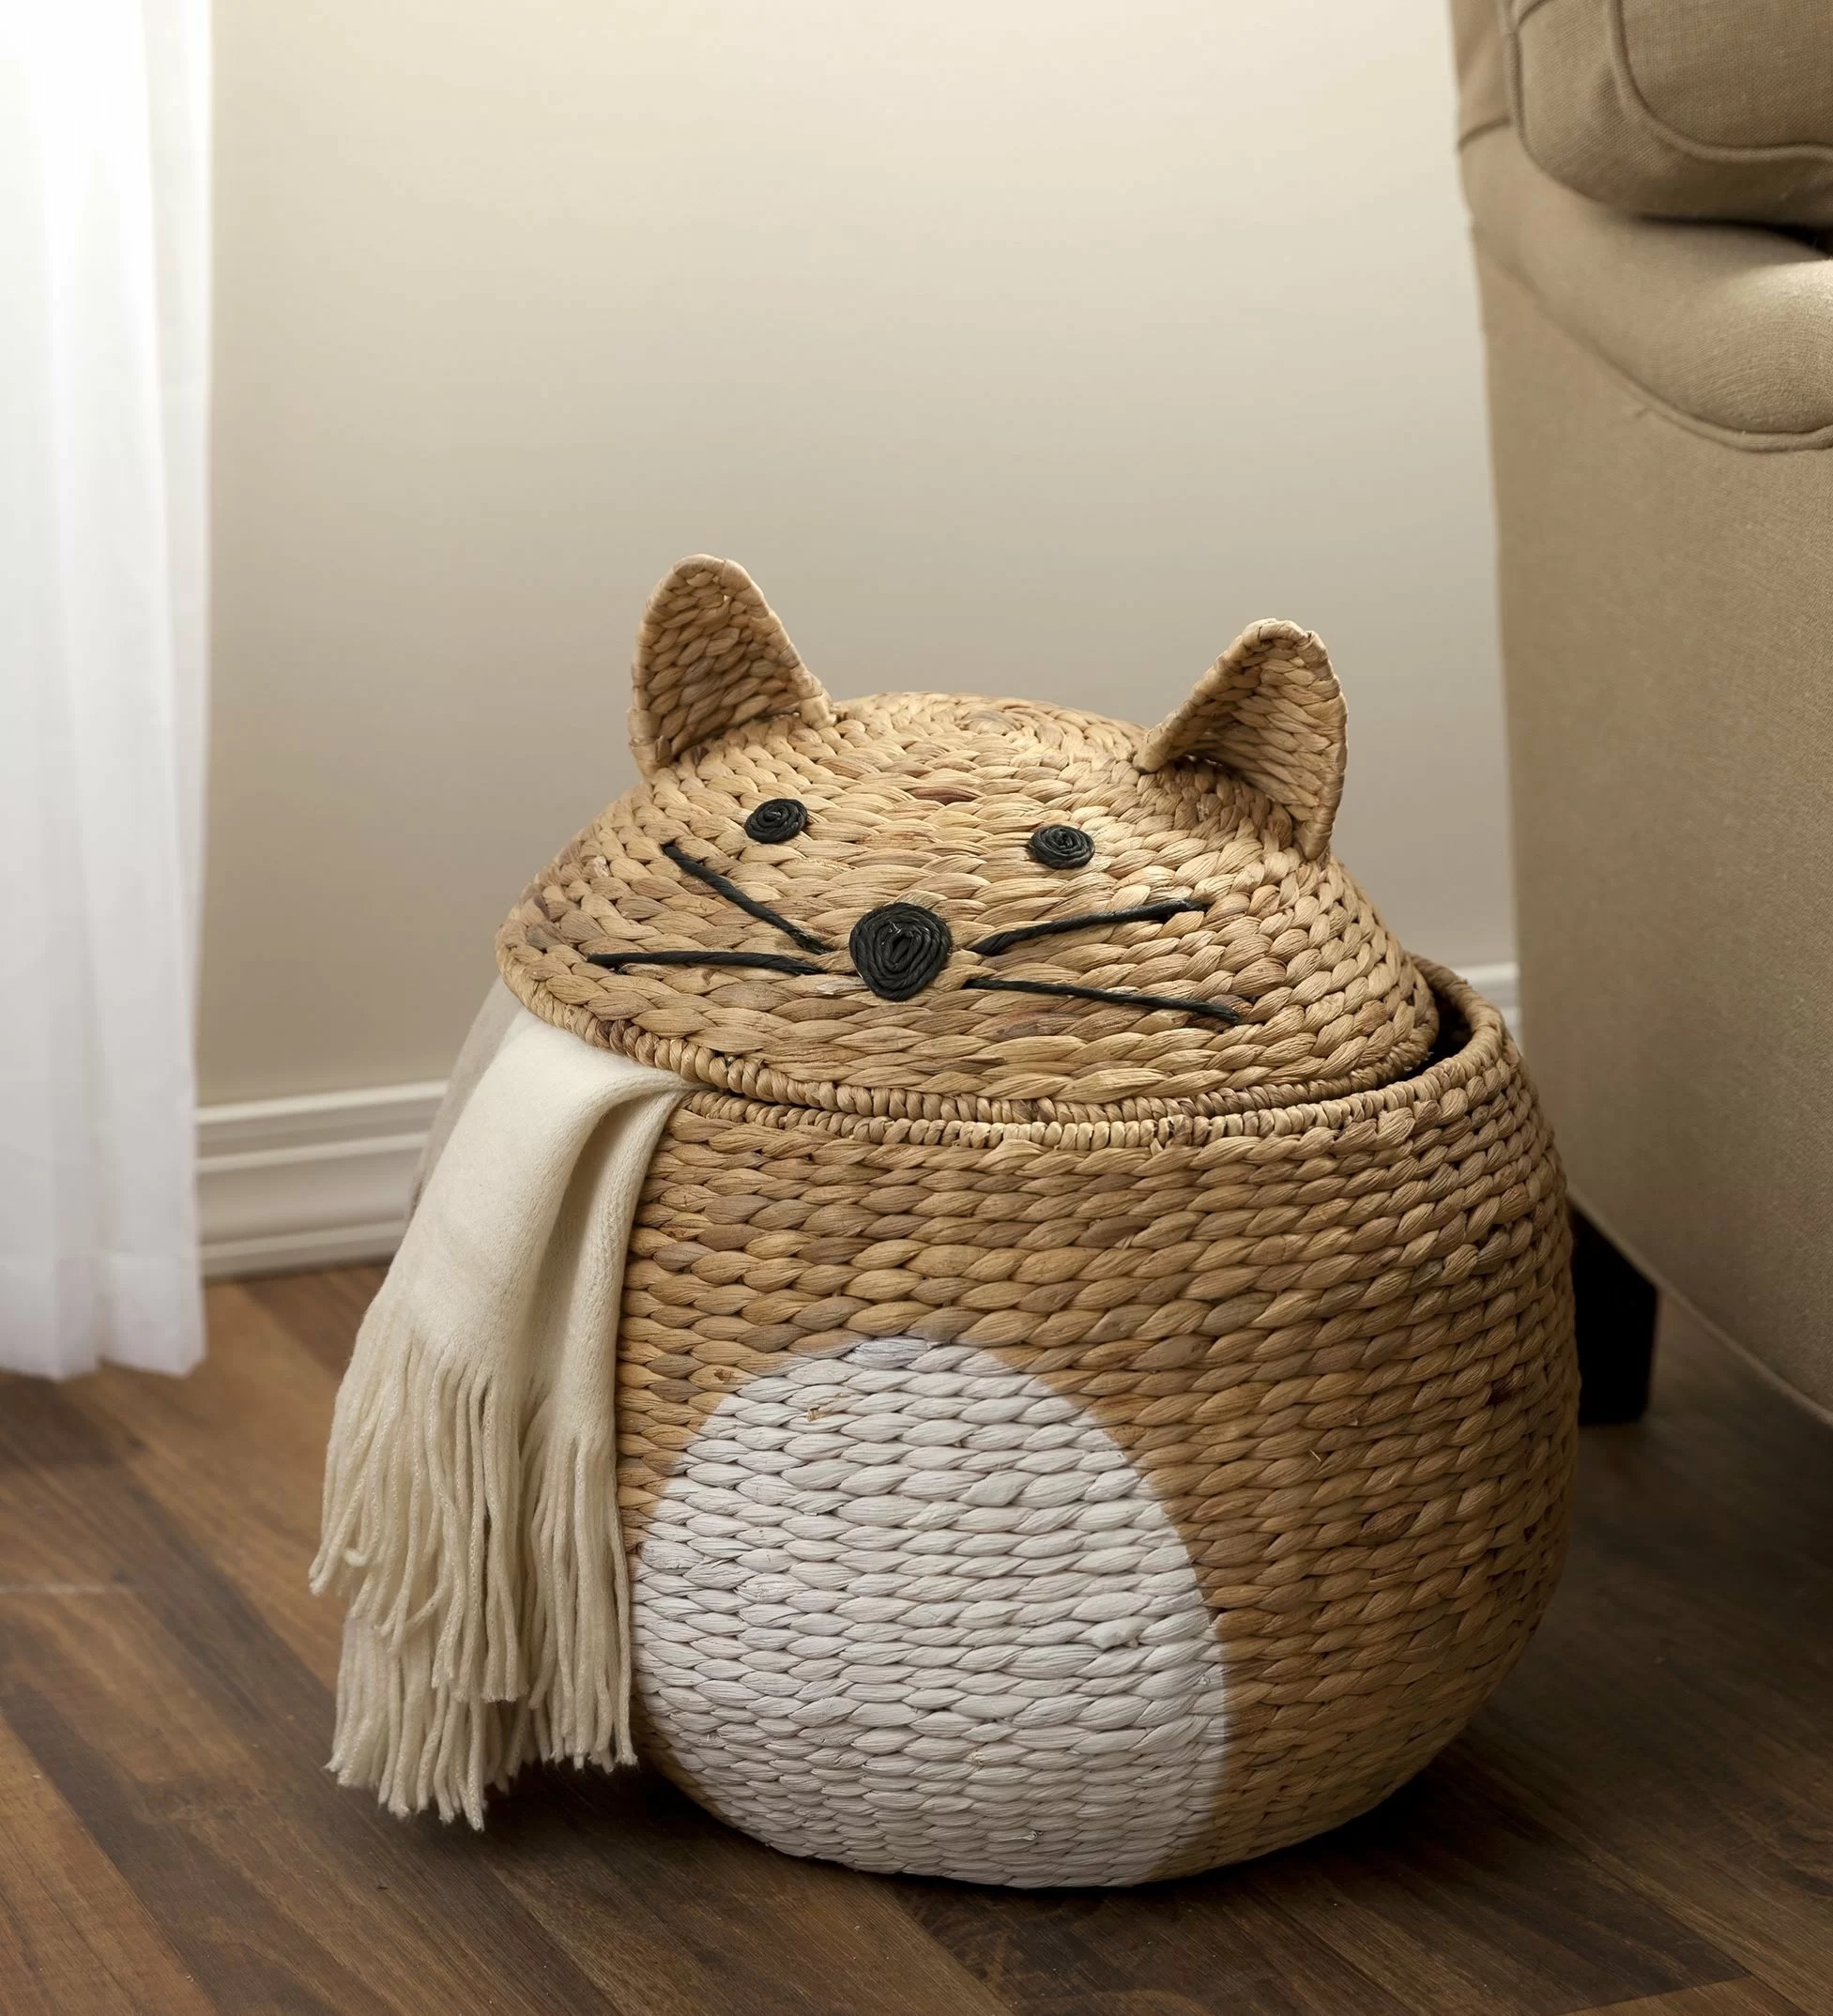 The round cat-shaped basket with ears, eyes, and whiskers